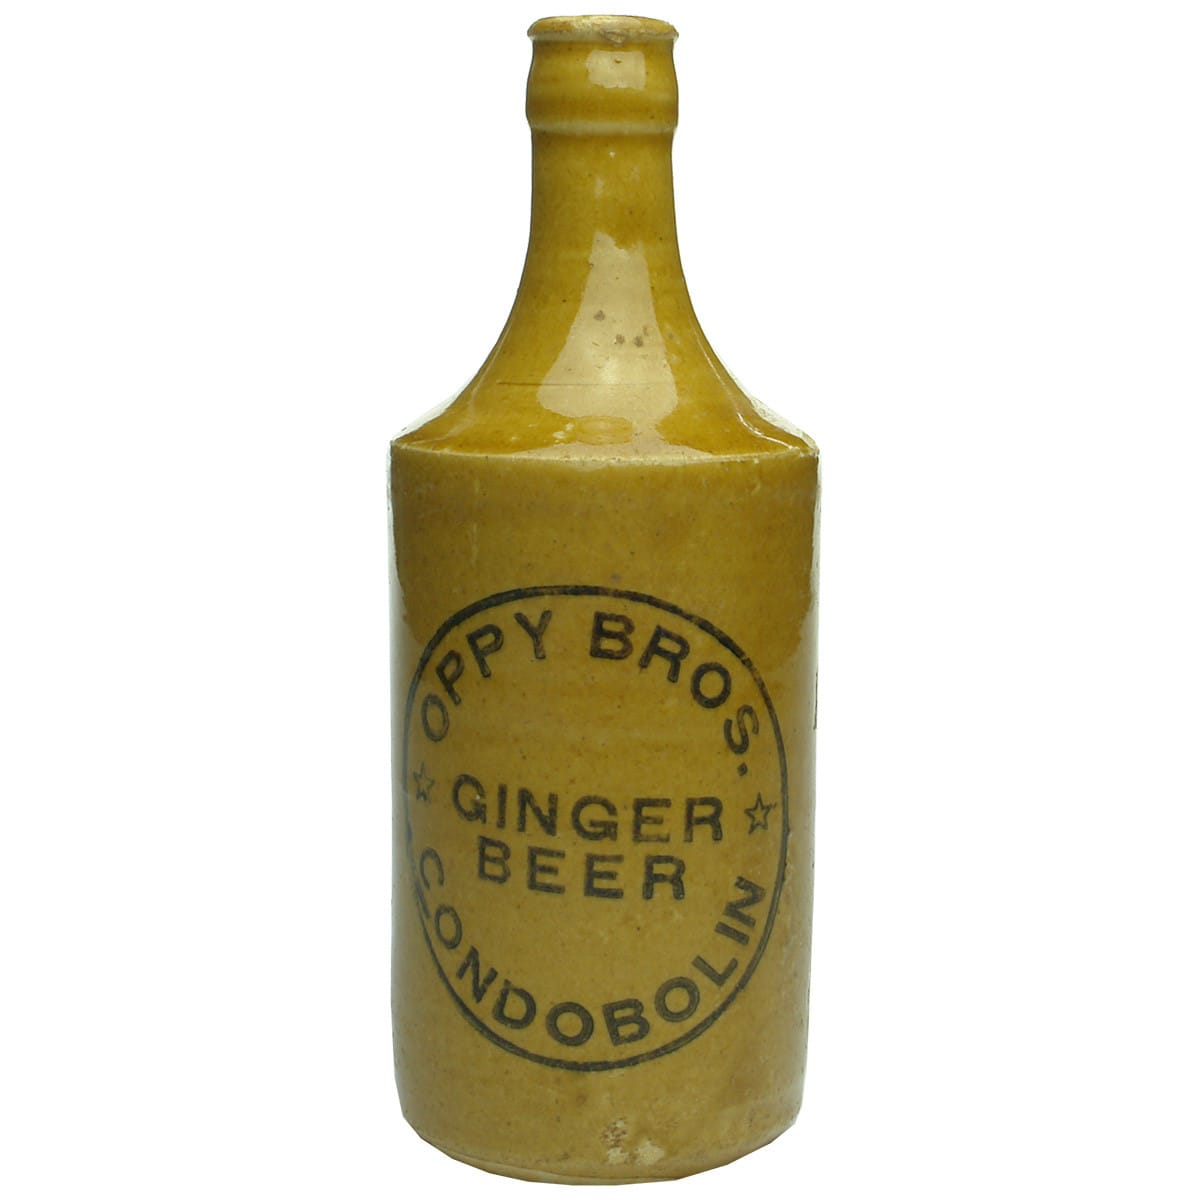 Ginger Beer. Oppy Bros., Condobolin. Crown Seal. Dump. All Tan. (New South Wales)